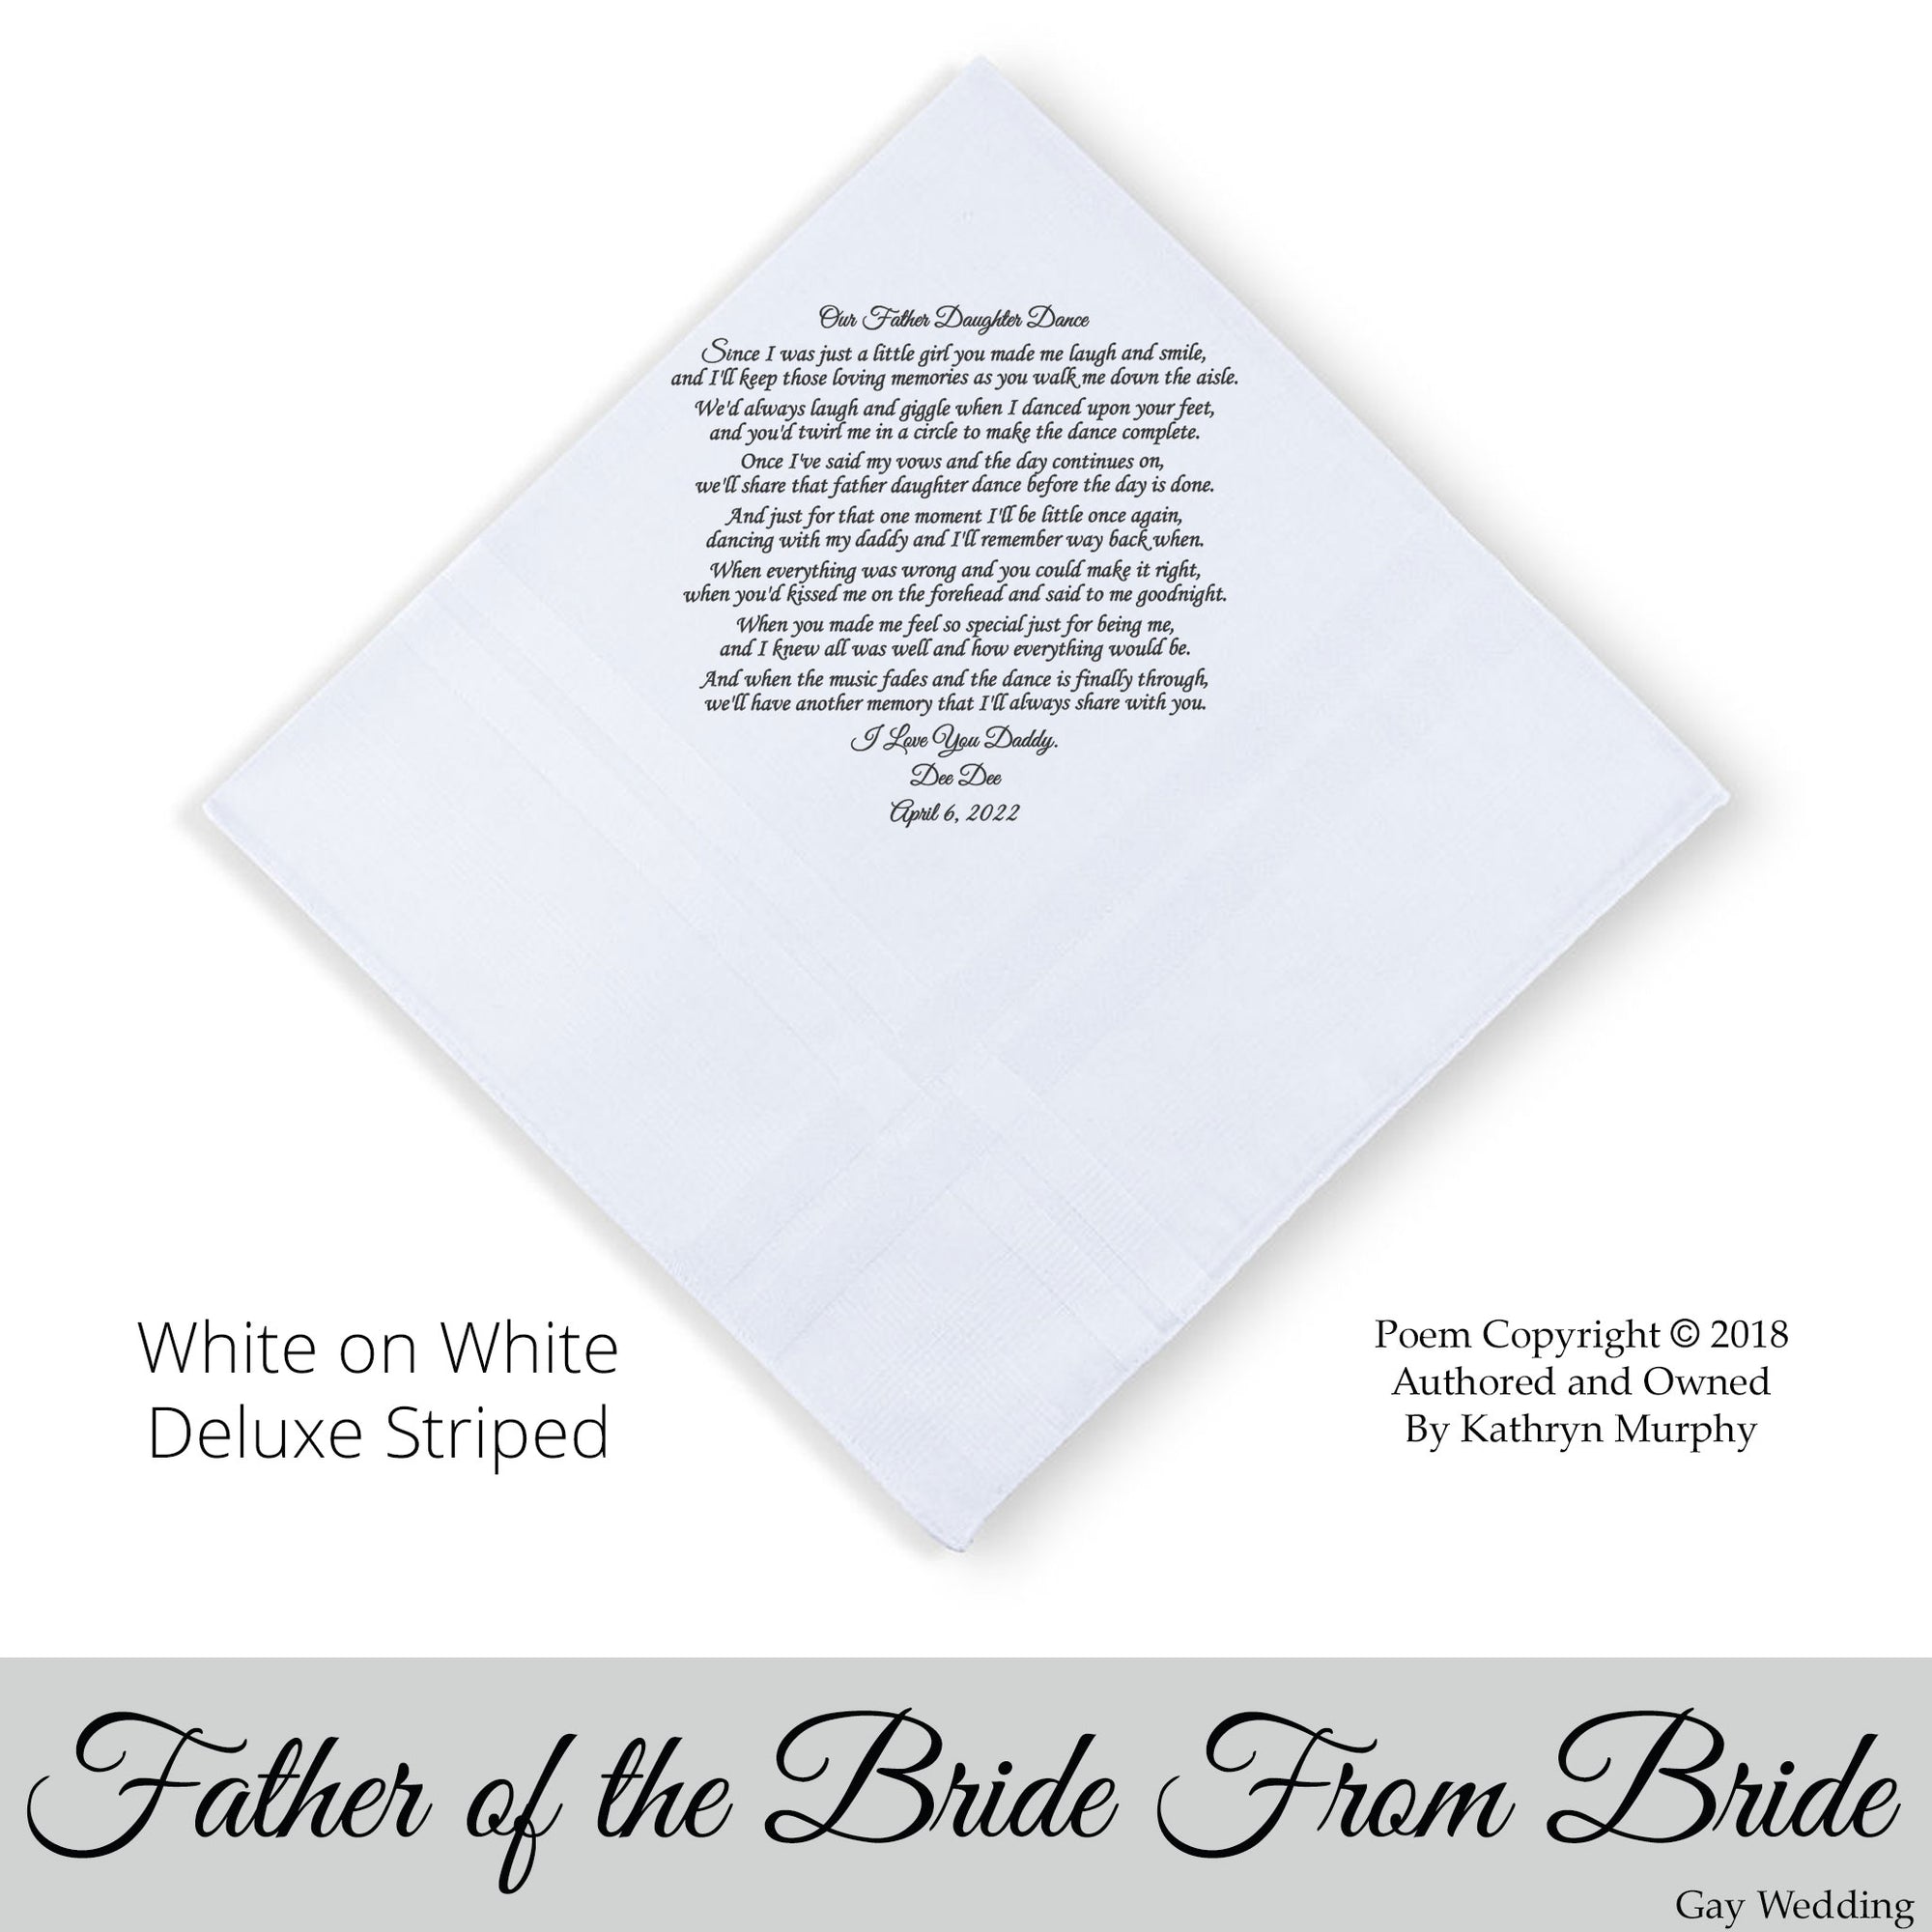 Gay Wedding Gift for the father of the bride poem printed wedding hankie